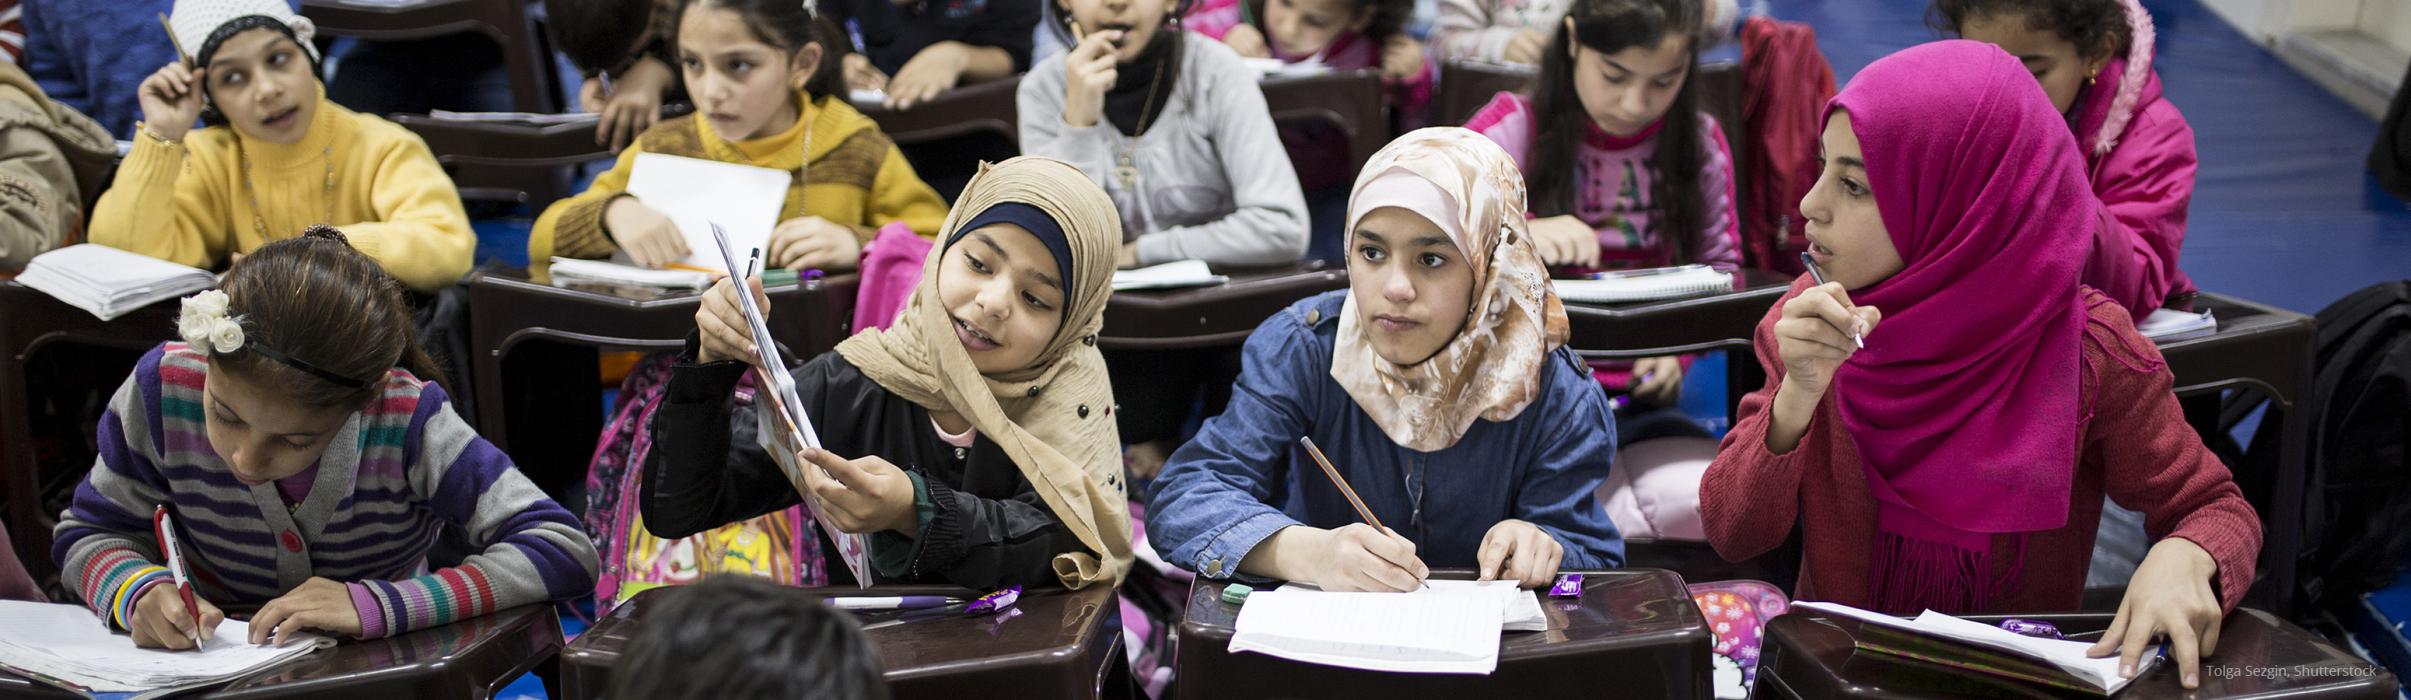 Syrian refugee children studying in a classroom in Istanbul, Turkey.